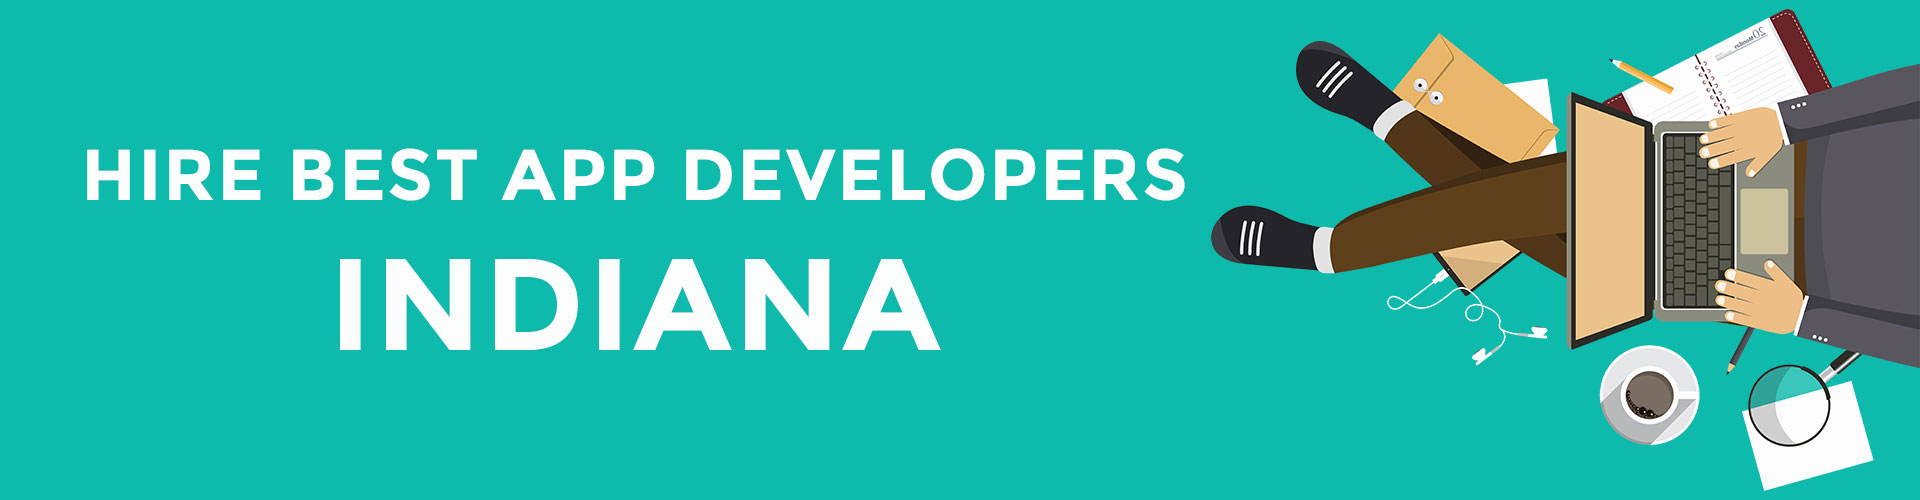 hire app developers indiana